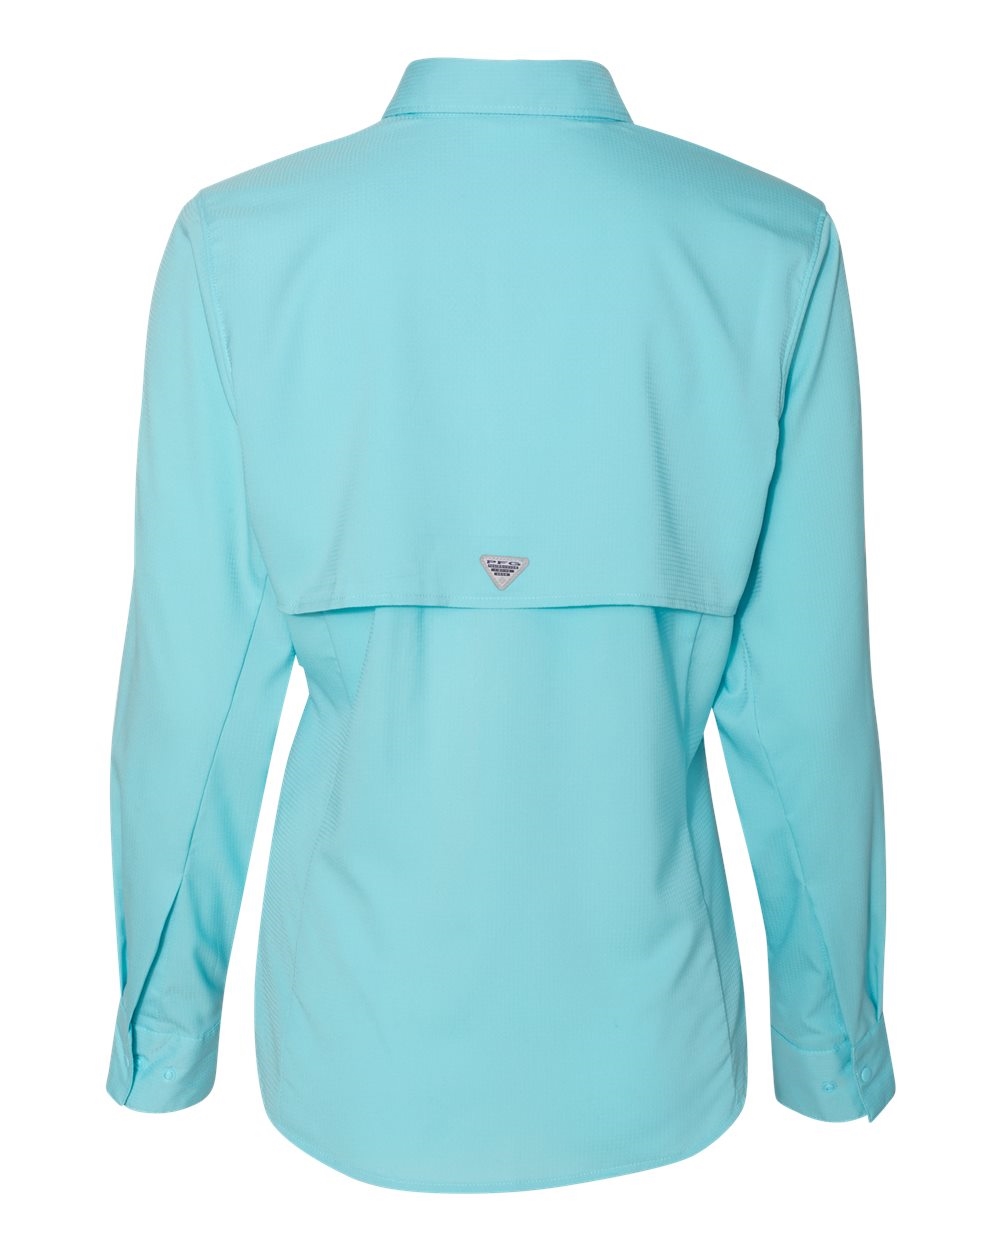 Columbia Women's PFG Tamiami™ II Long-Sleeve Fishing Shirts 127570. Free  shipping available. 30 Day Return Policy. Quantity Discounts.